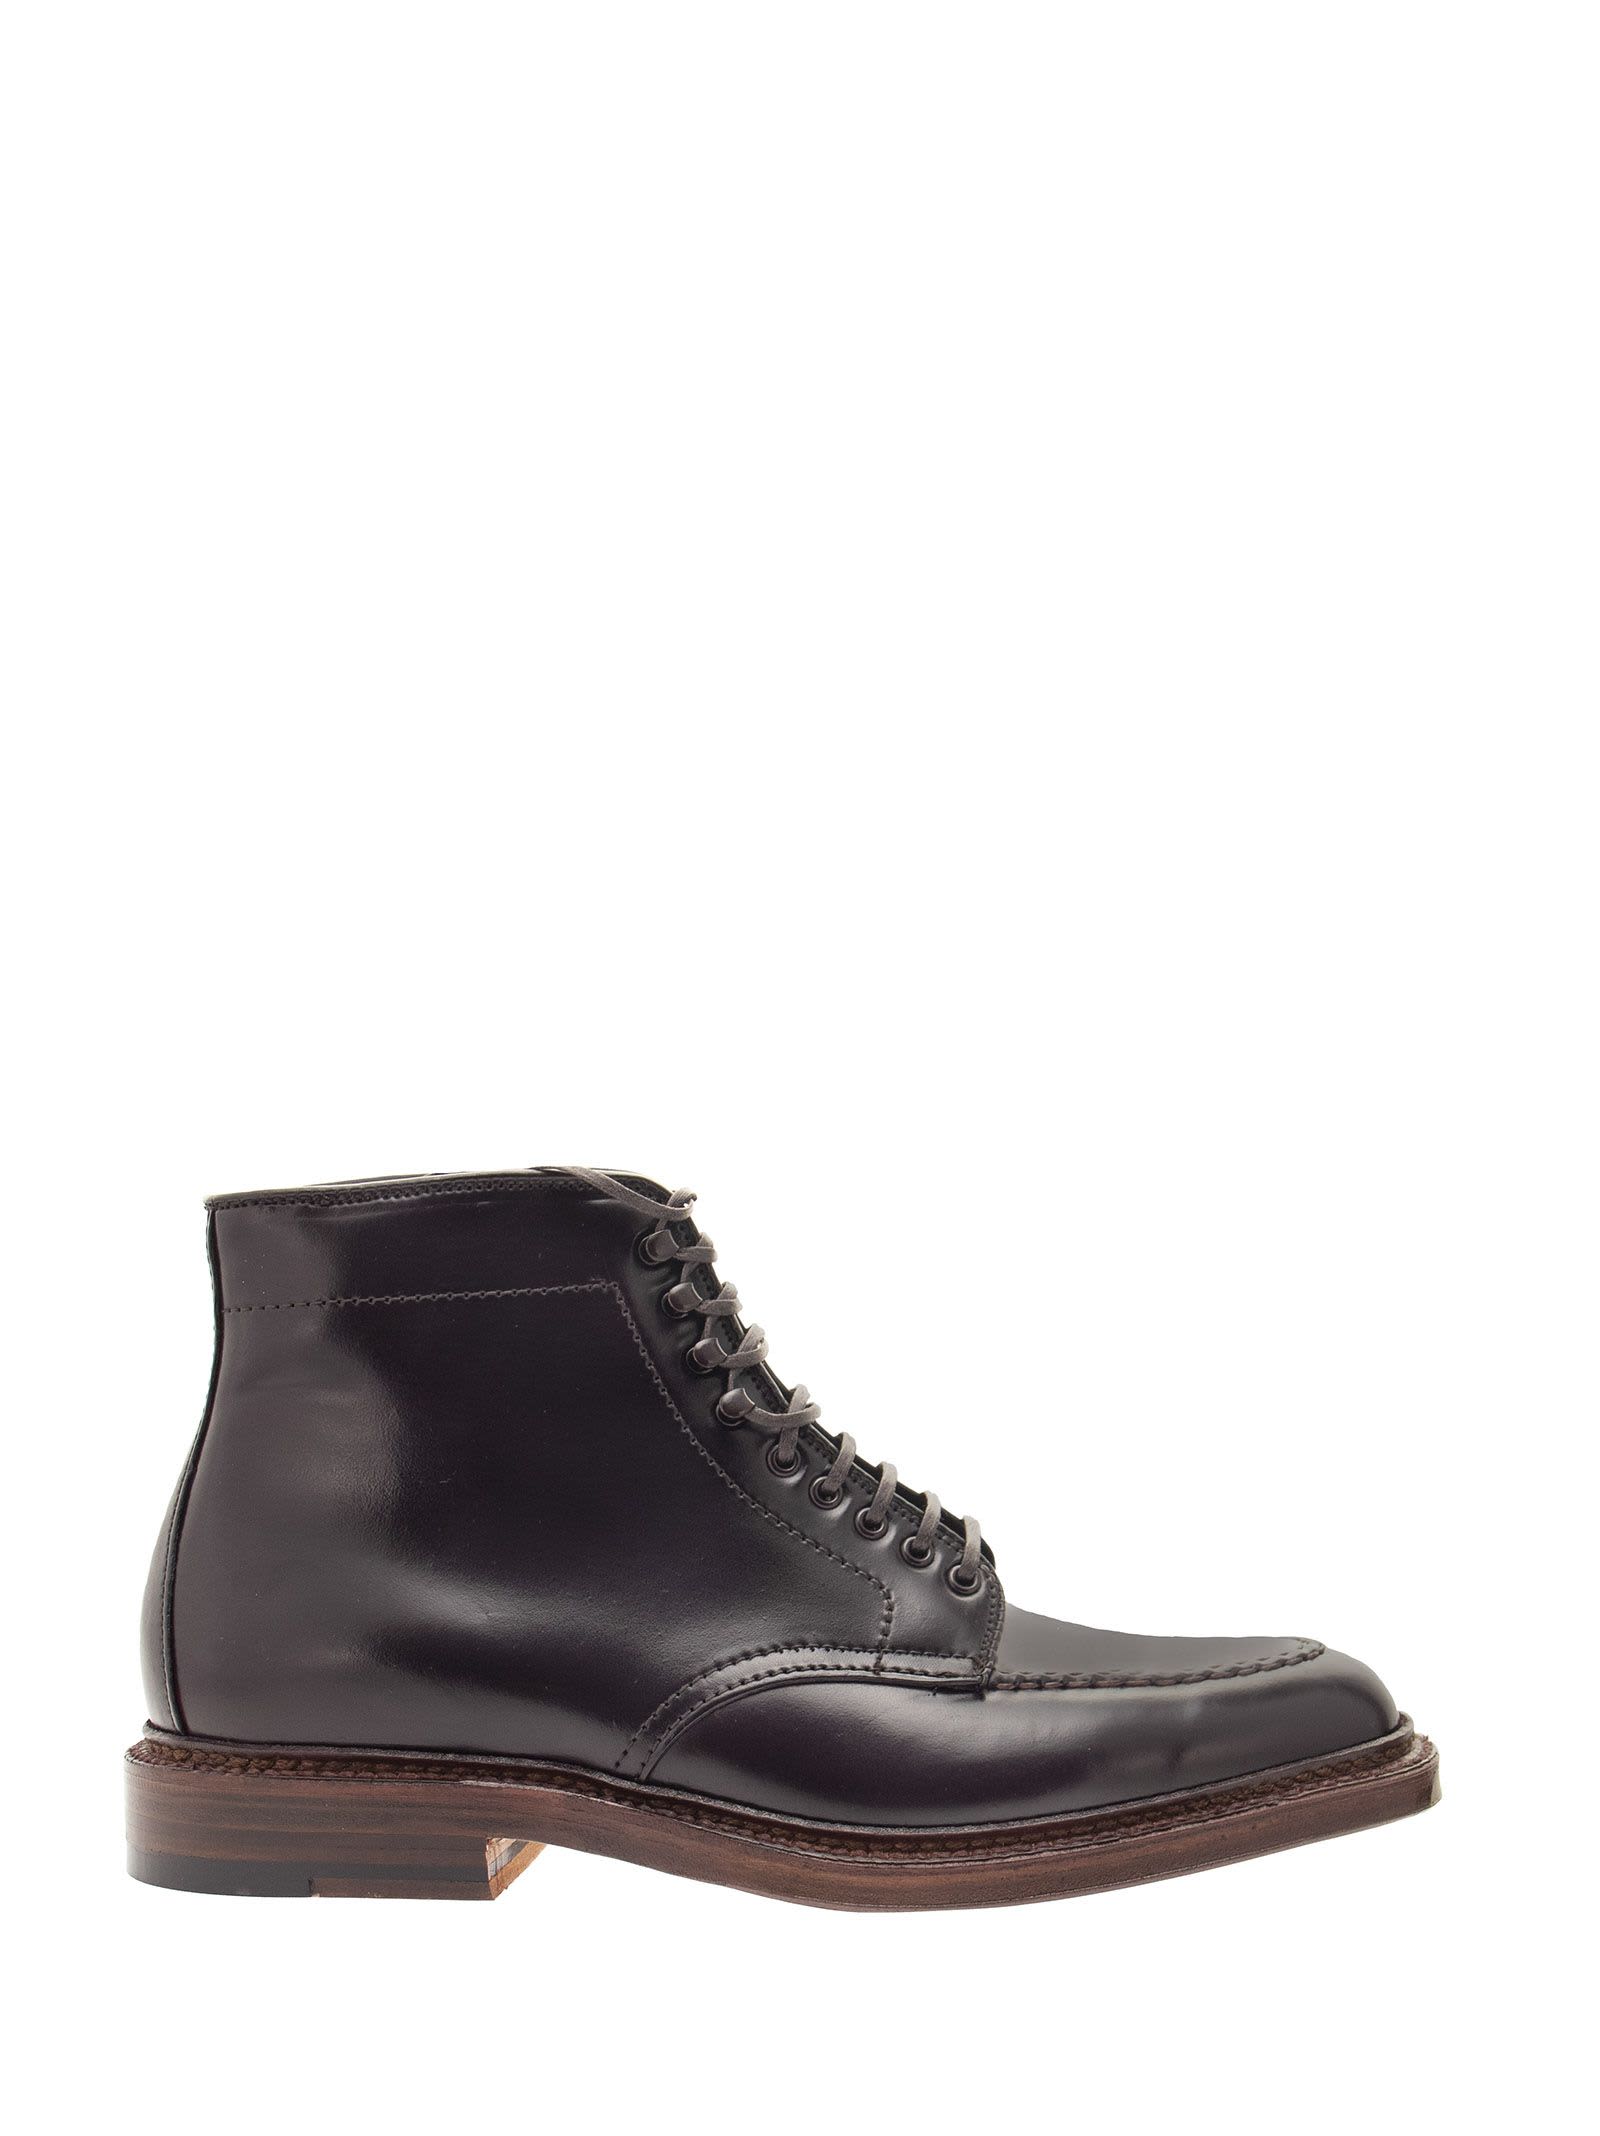 Alden Indy Boot With Cordovan Shell